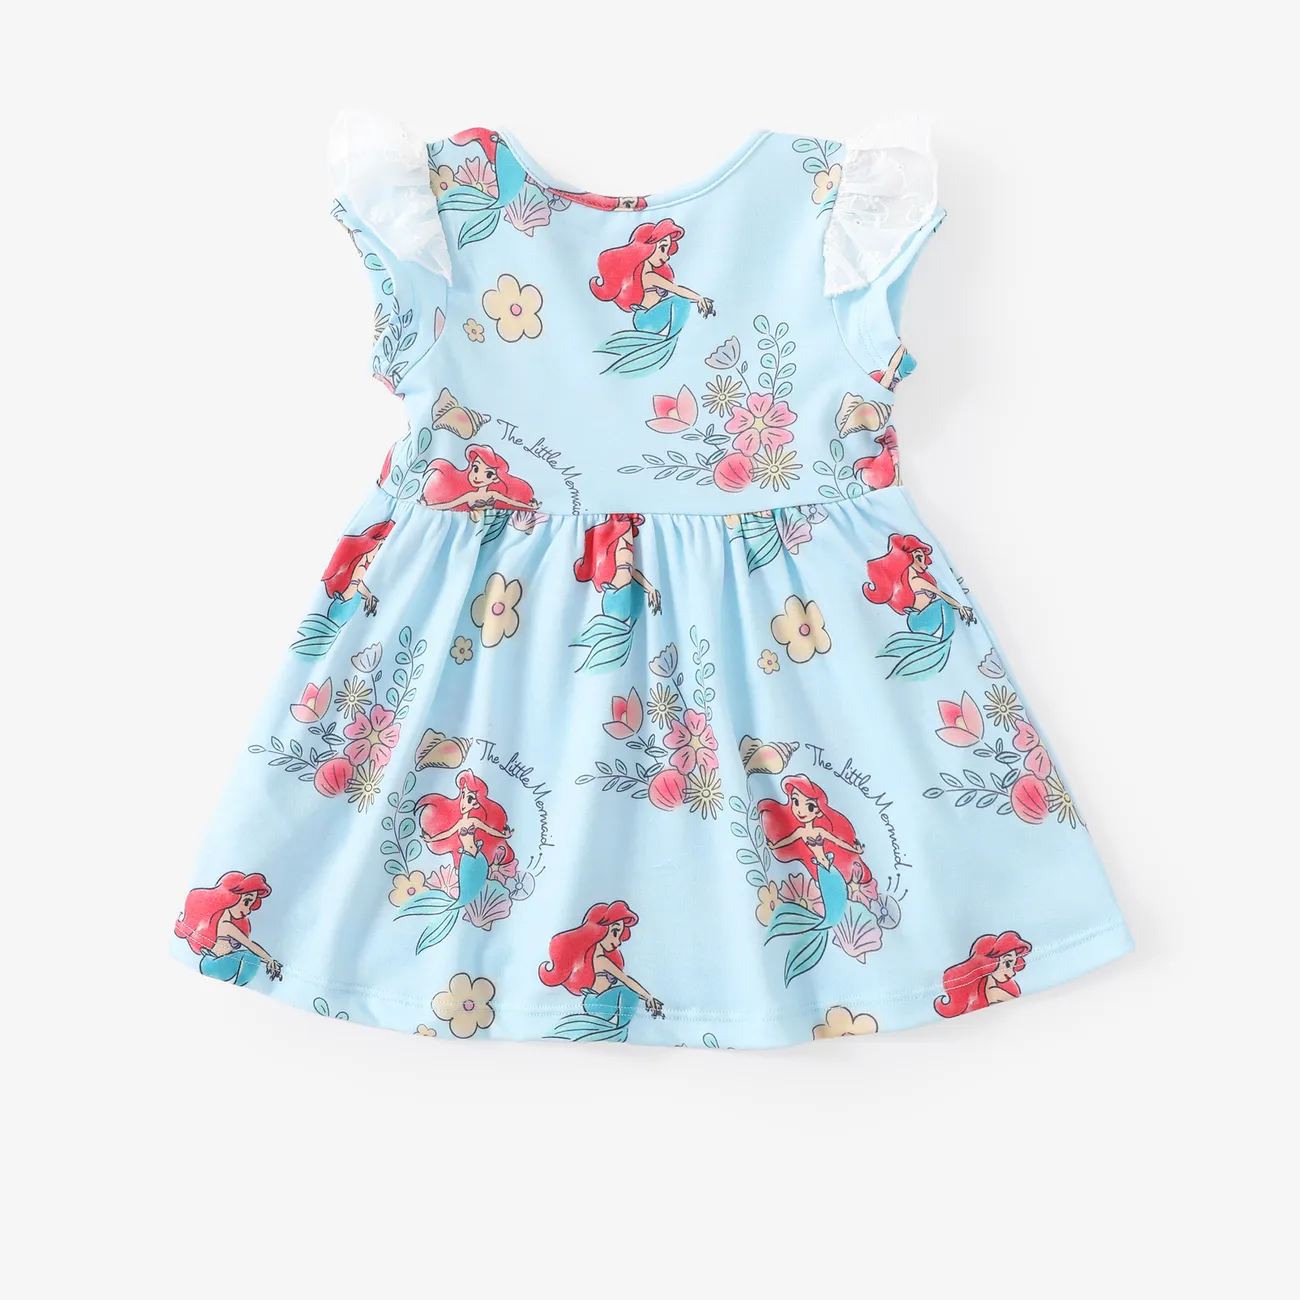 Disney Princess Baby/Toddler Girls Ariel/Belle/Snow White 1pc Naia™ Character All-over Print Lace Ruffled-sleeve Dress Blue big image 1